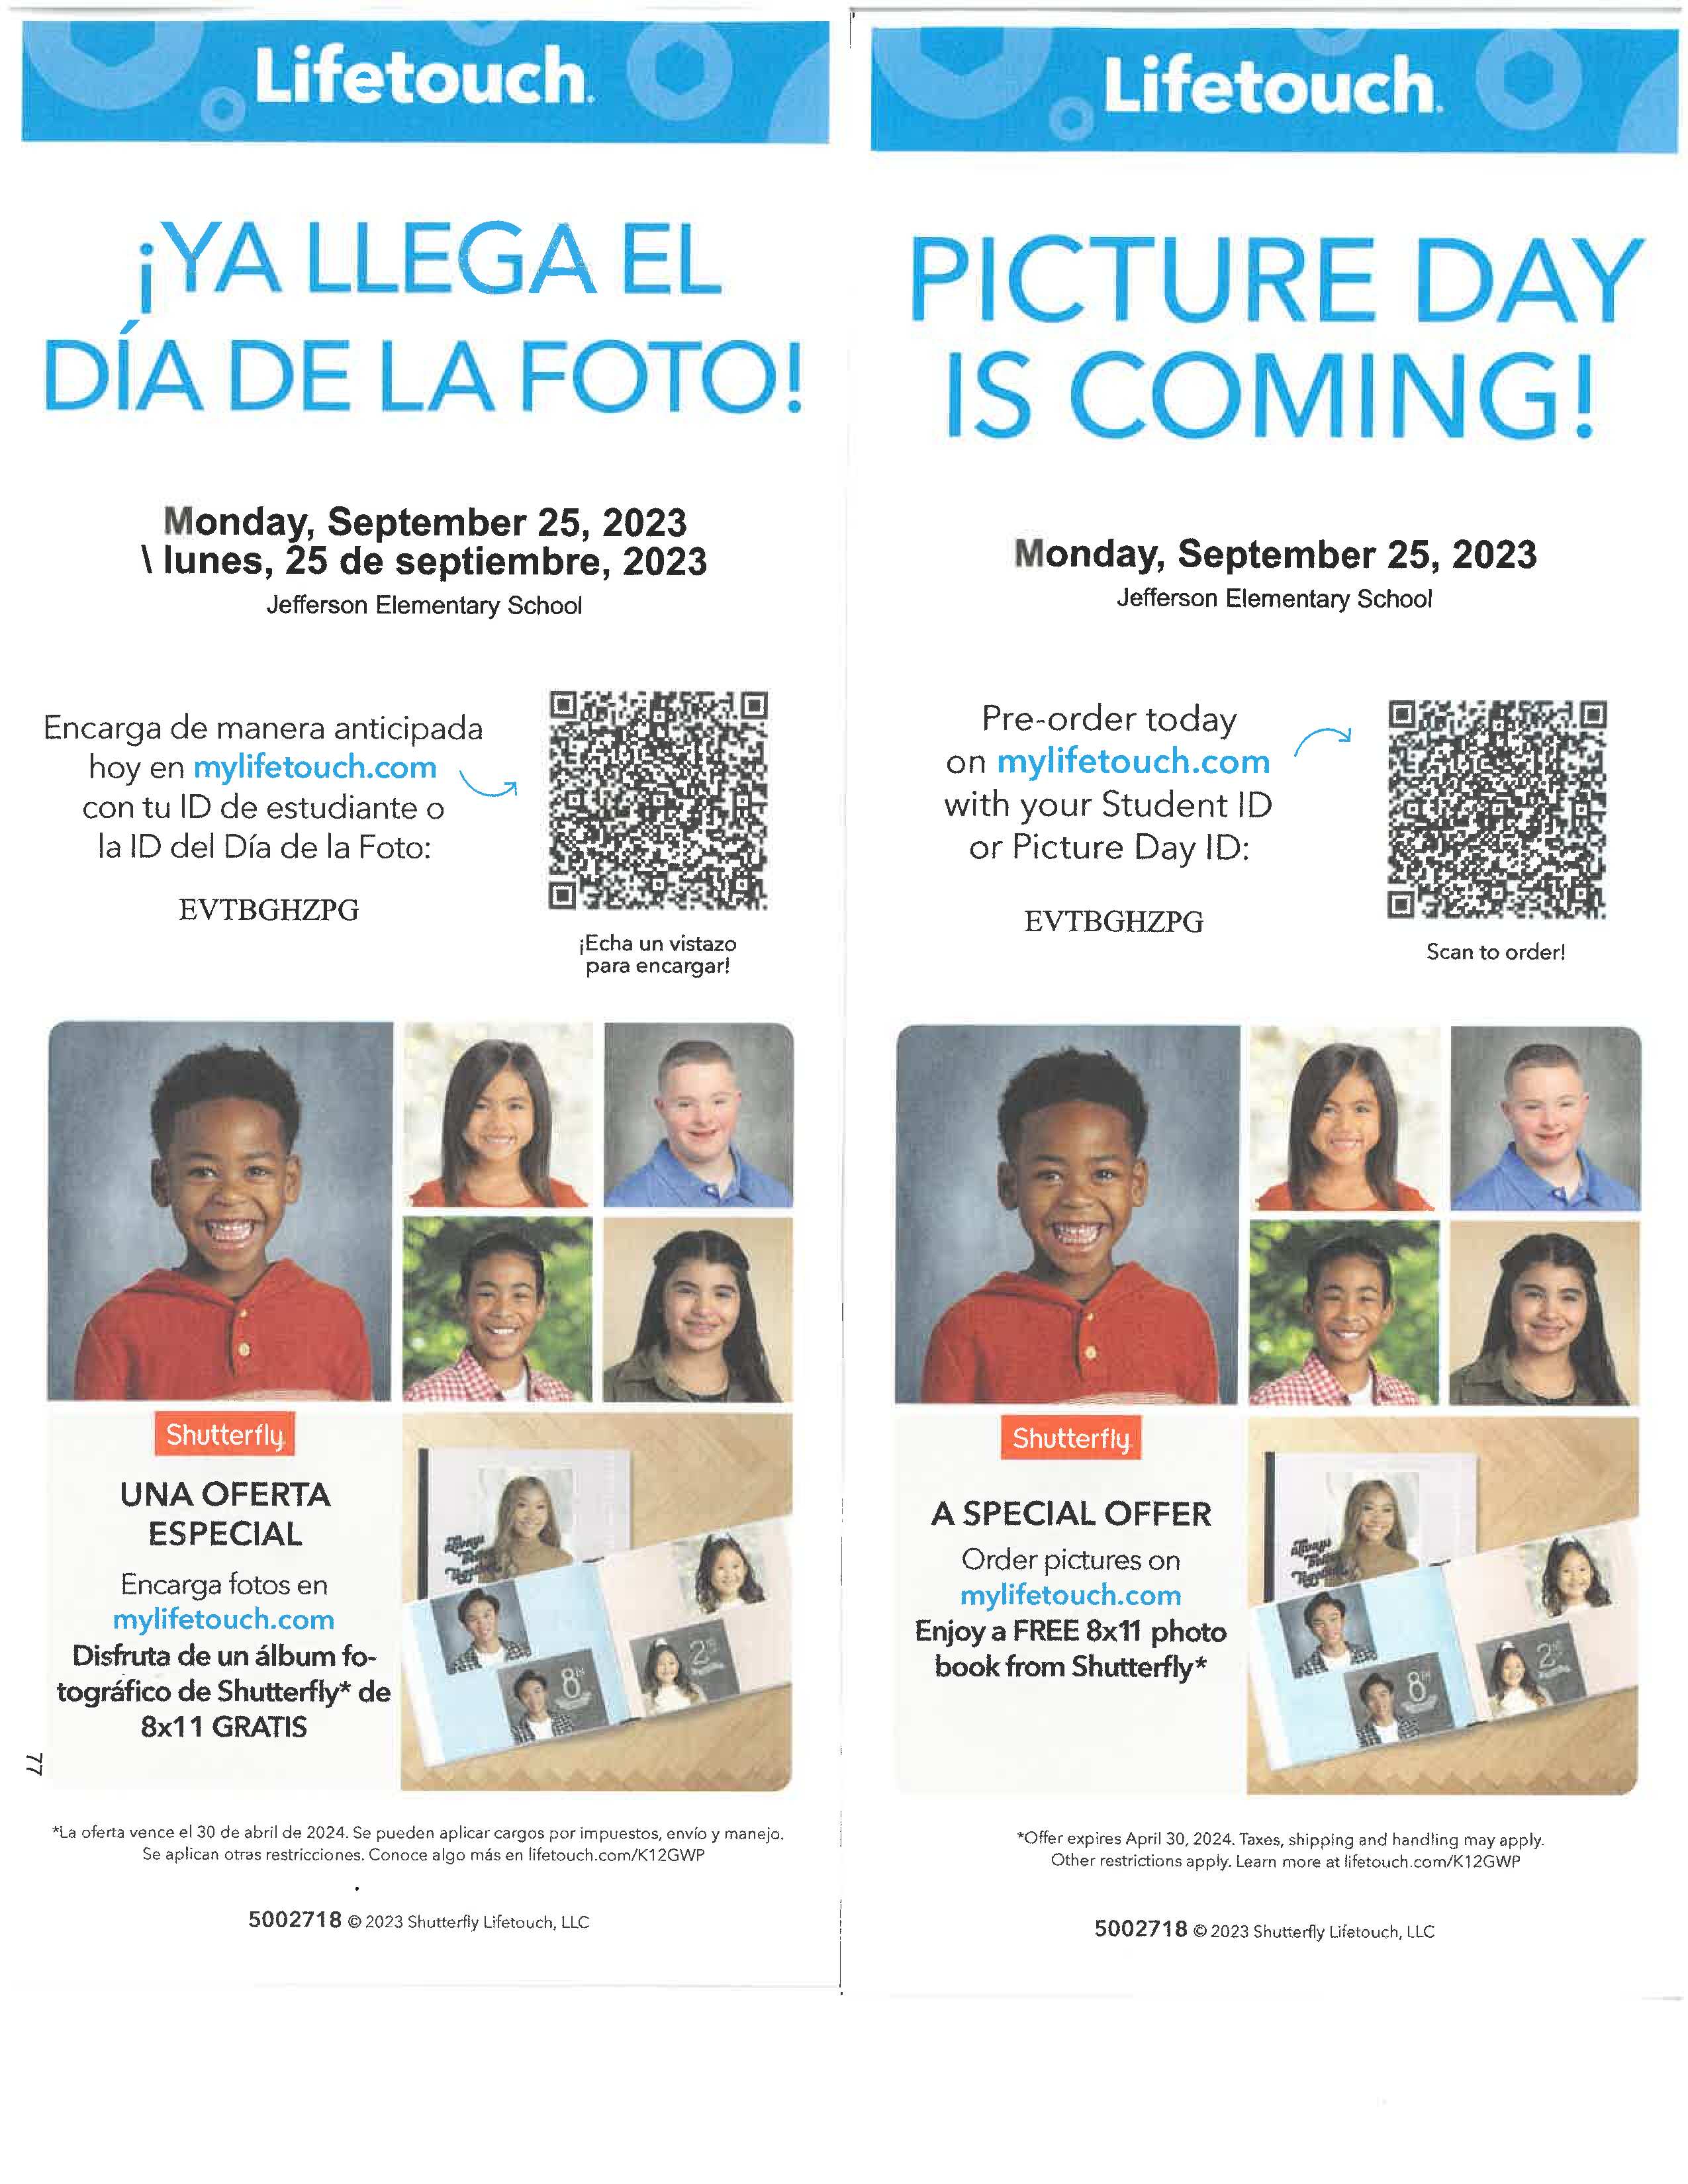 Flyer in English and Spanish announcing Picture Day.